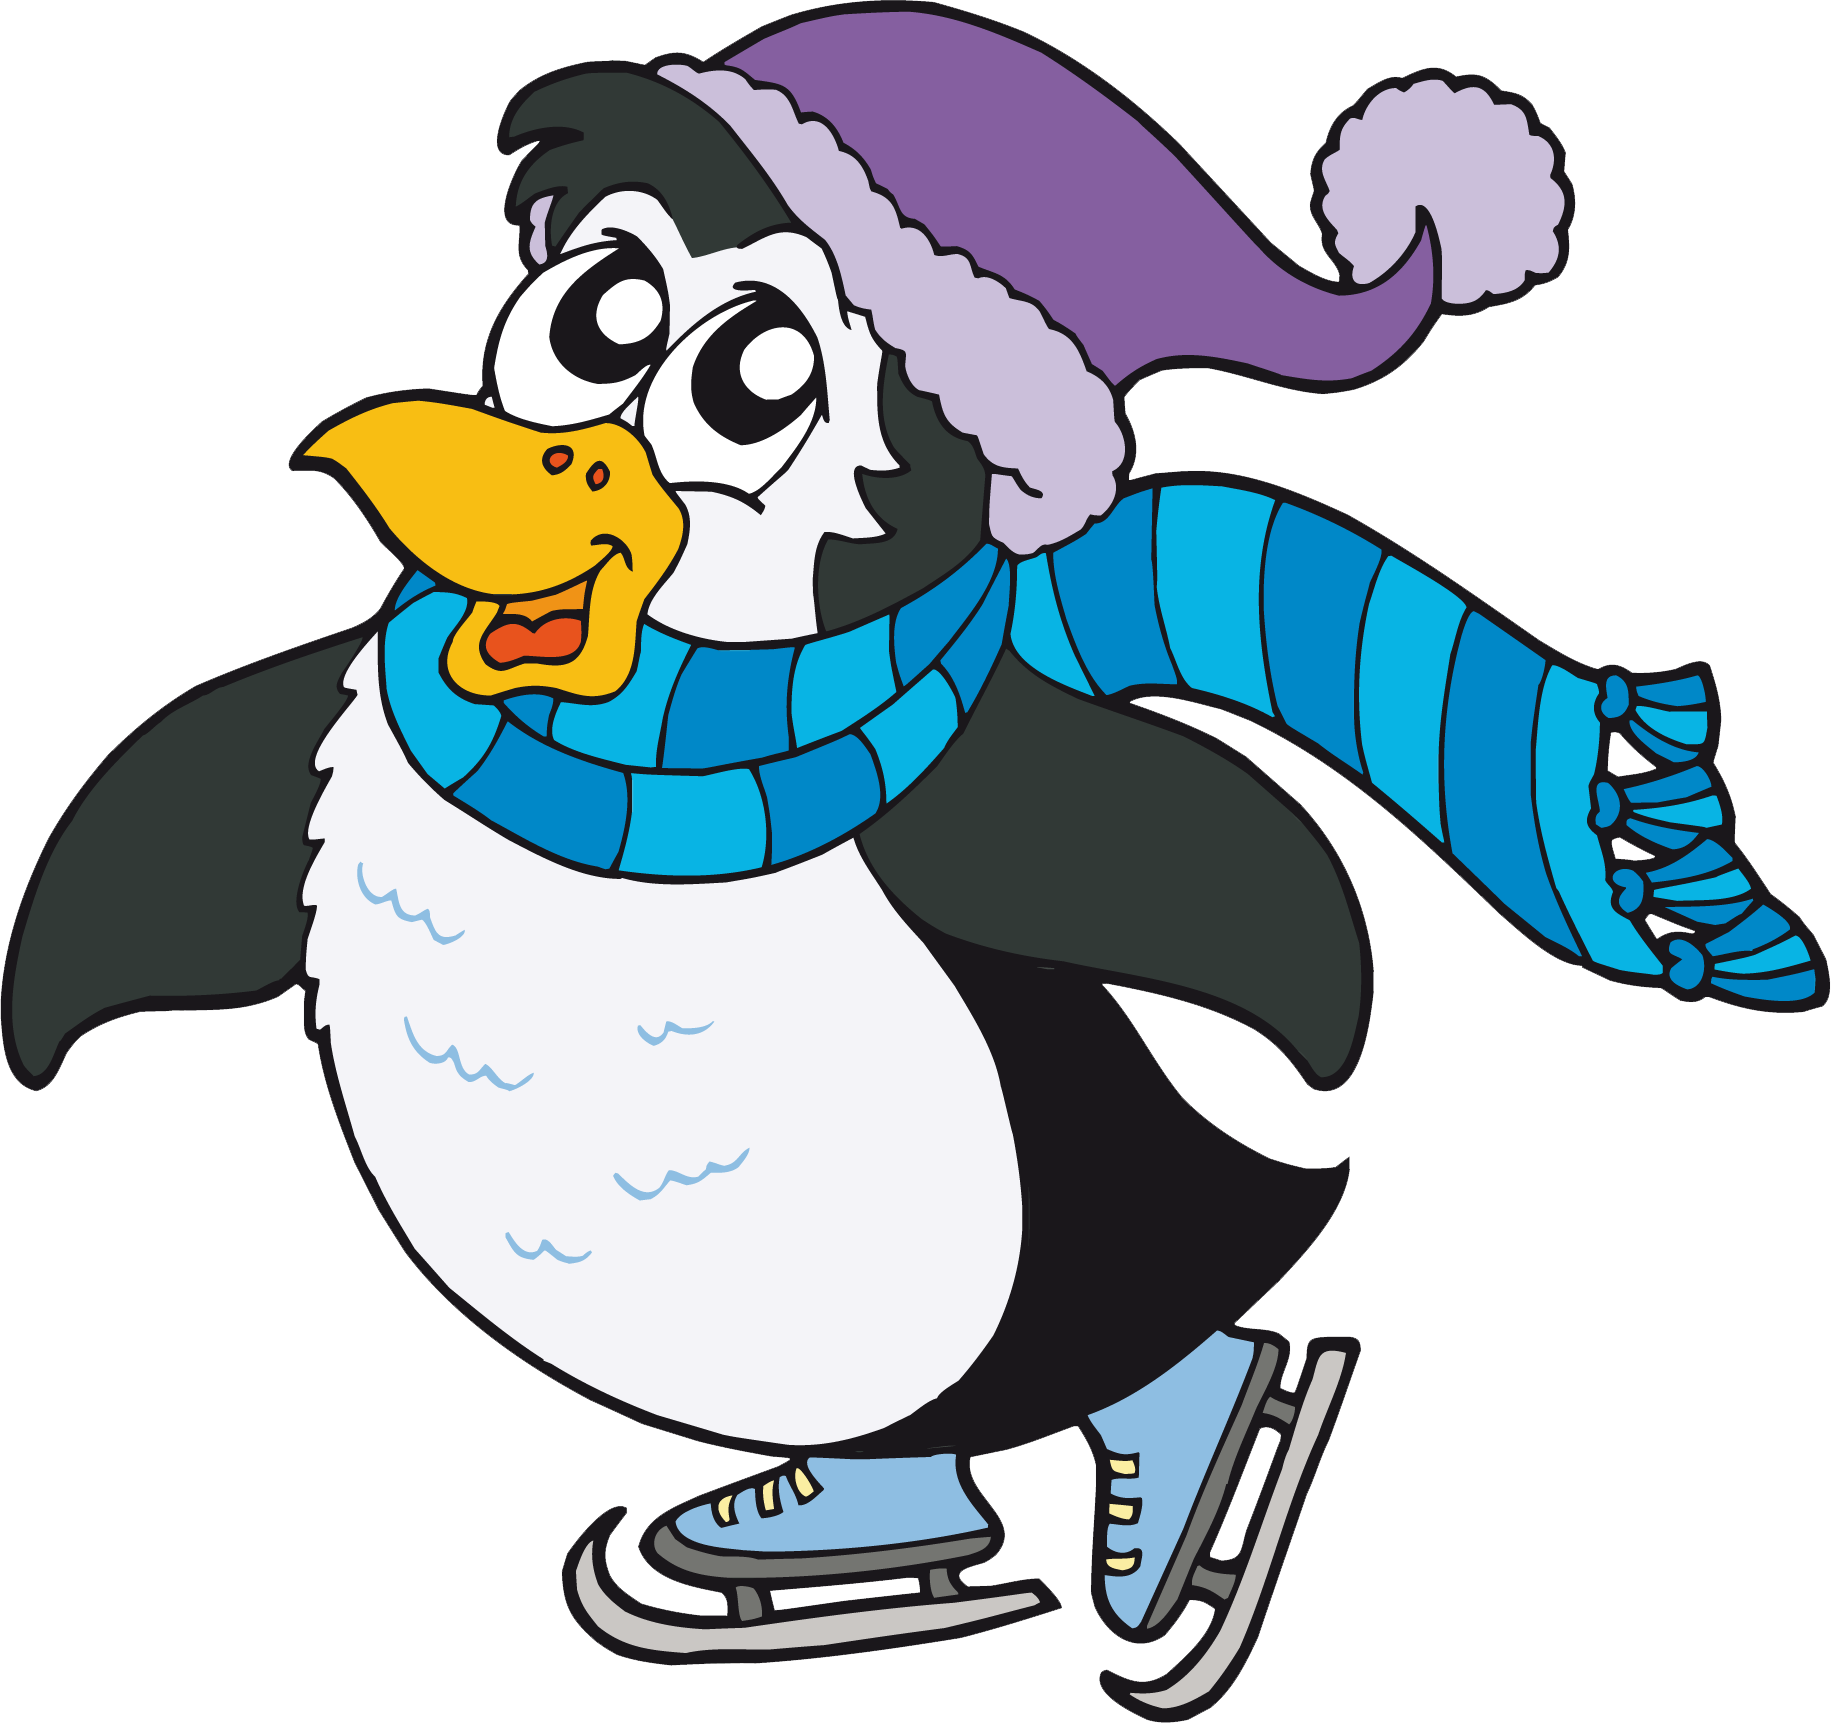 Ice Skating, Penguins, Applique, Group, Pin Pin, Christmas, - Funny Penguin Vinyl Wall Decal (black) (1831x1723)